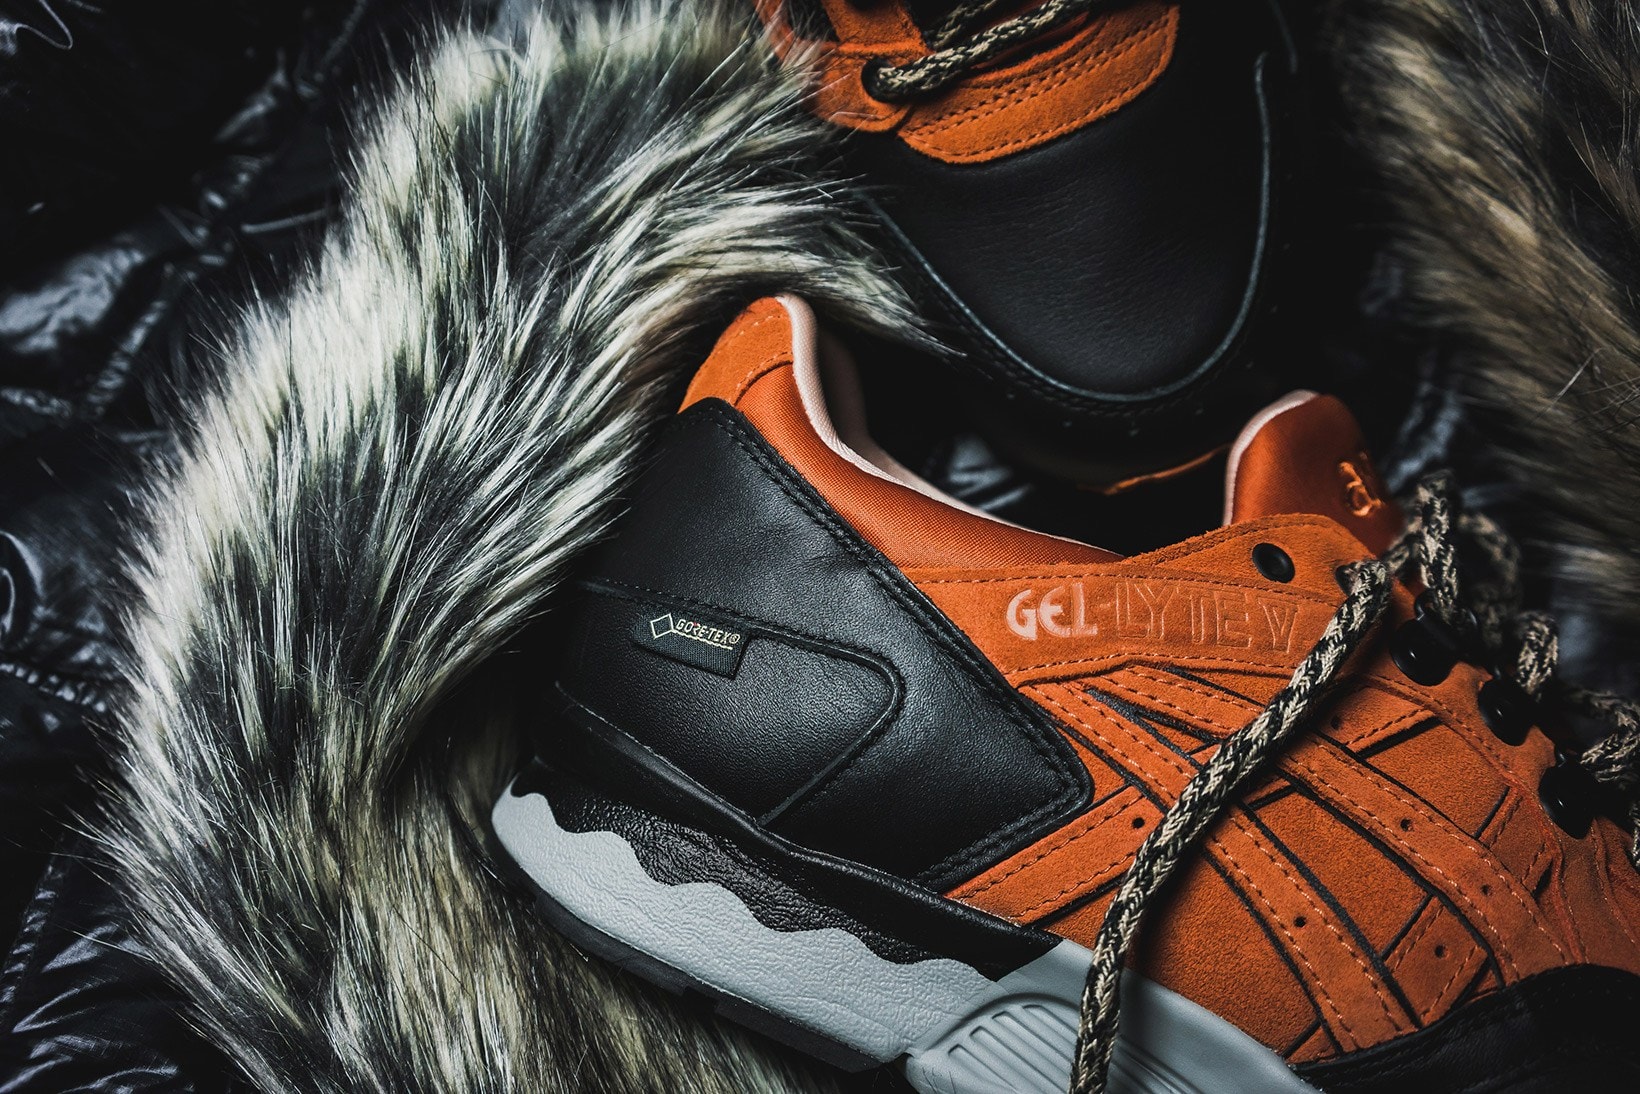 Packer Shoes x ASICS Tiger & New Era “Scary Cold”